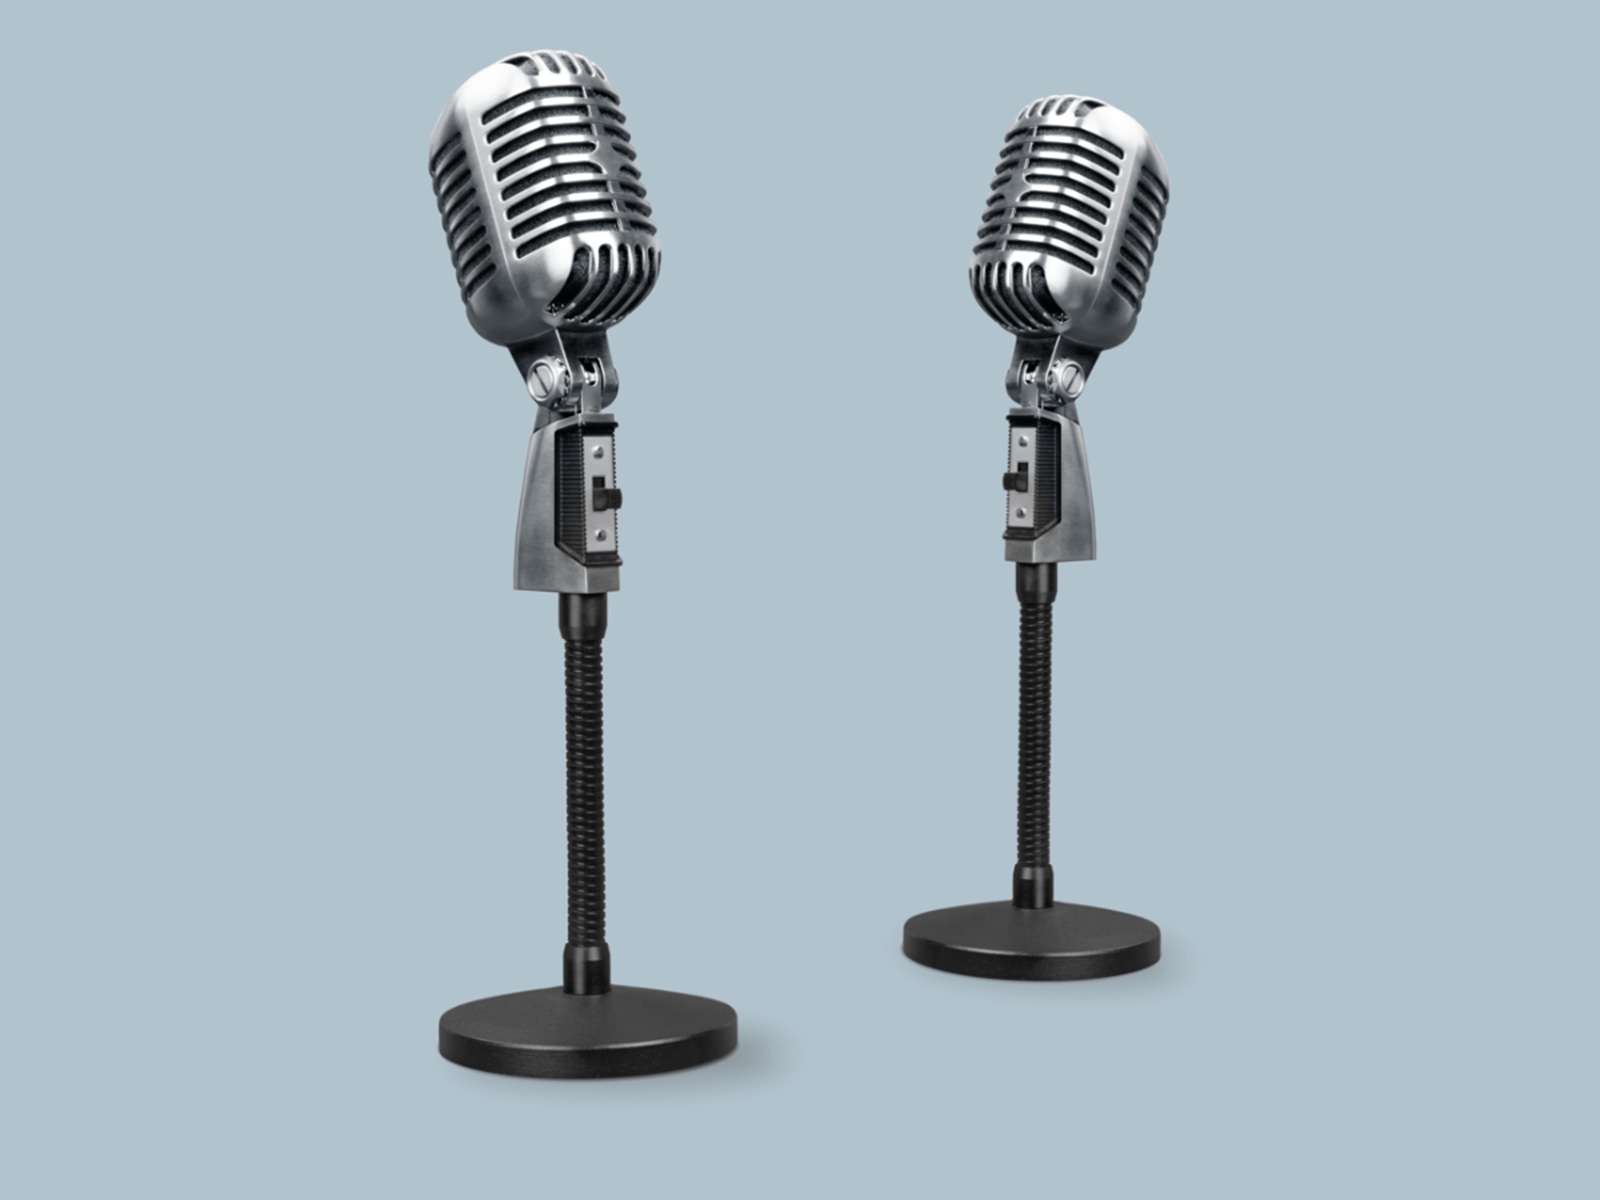 Image of two old school microphones